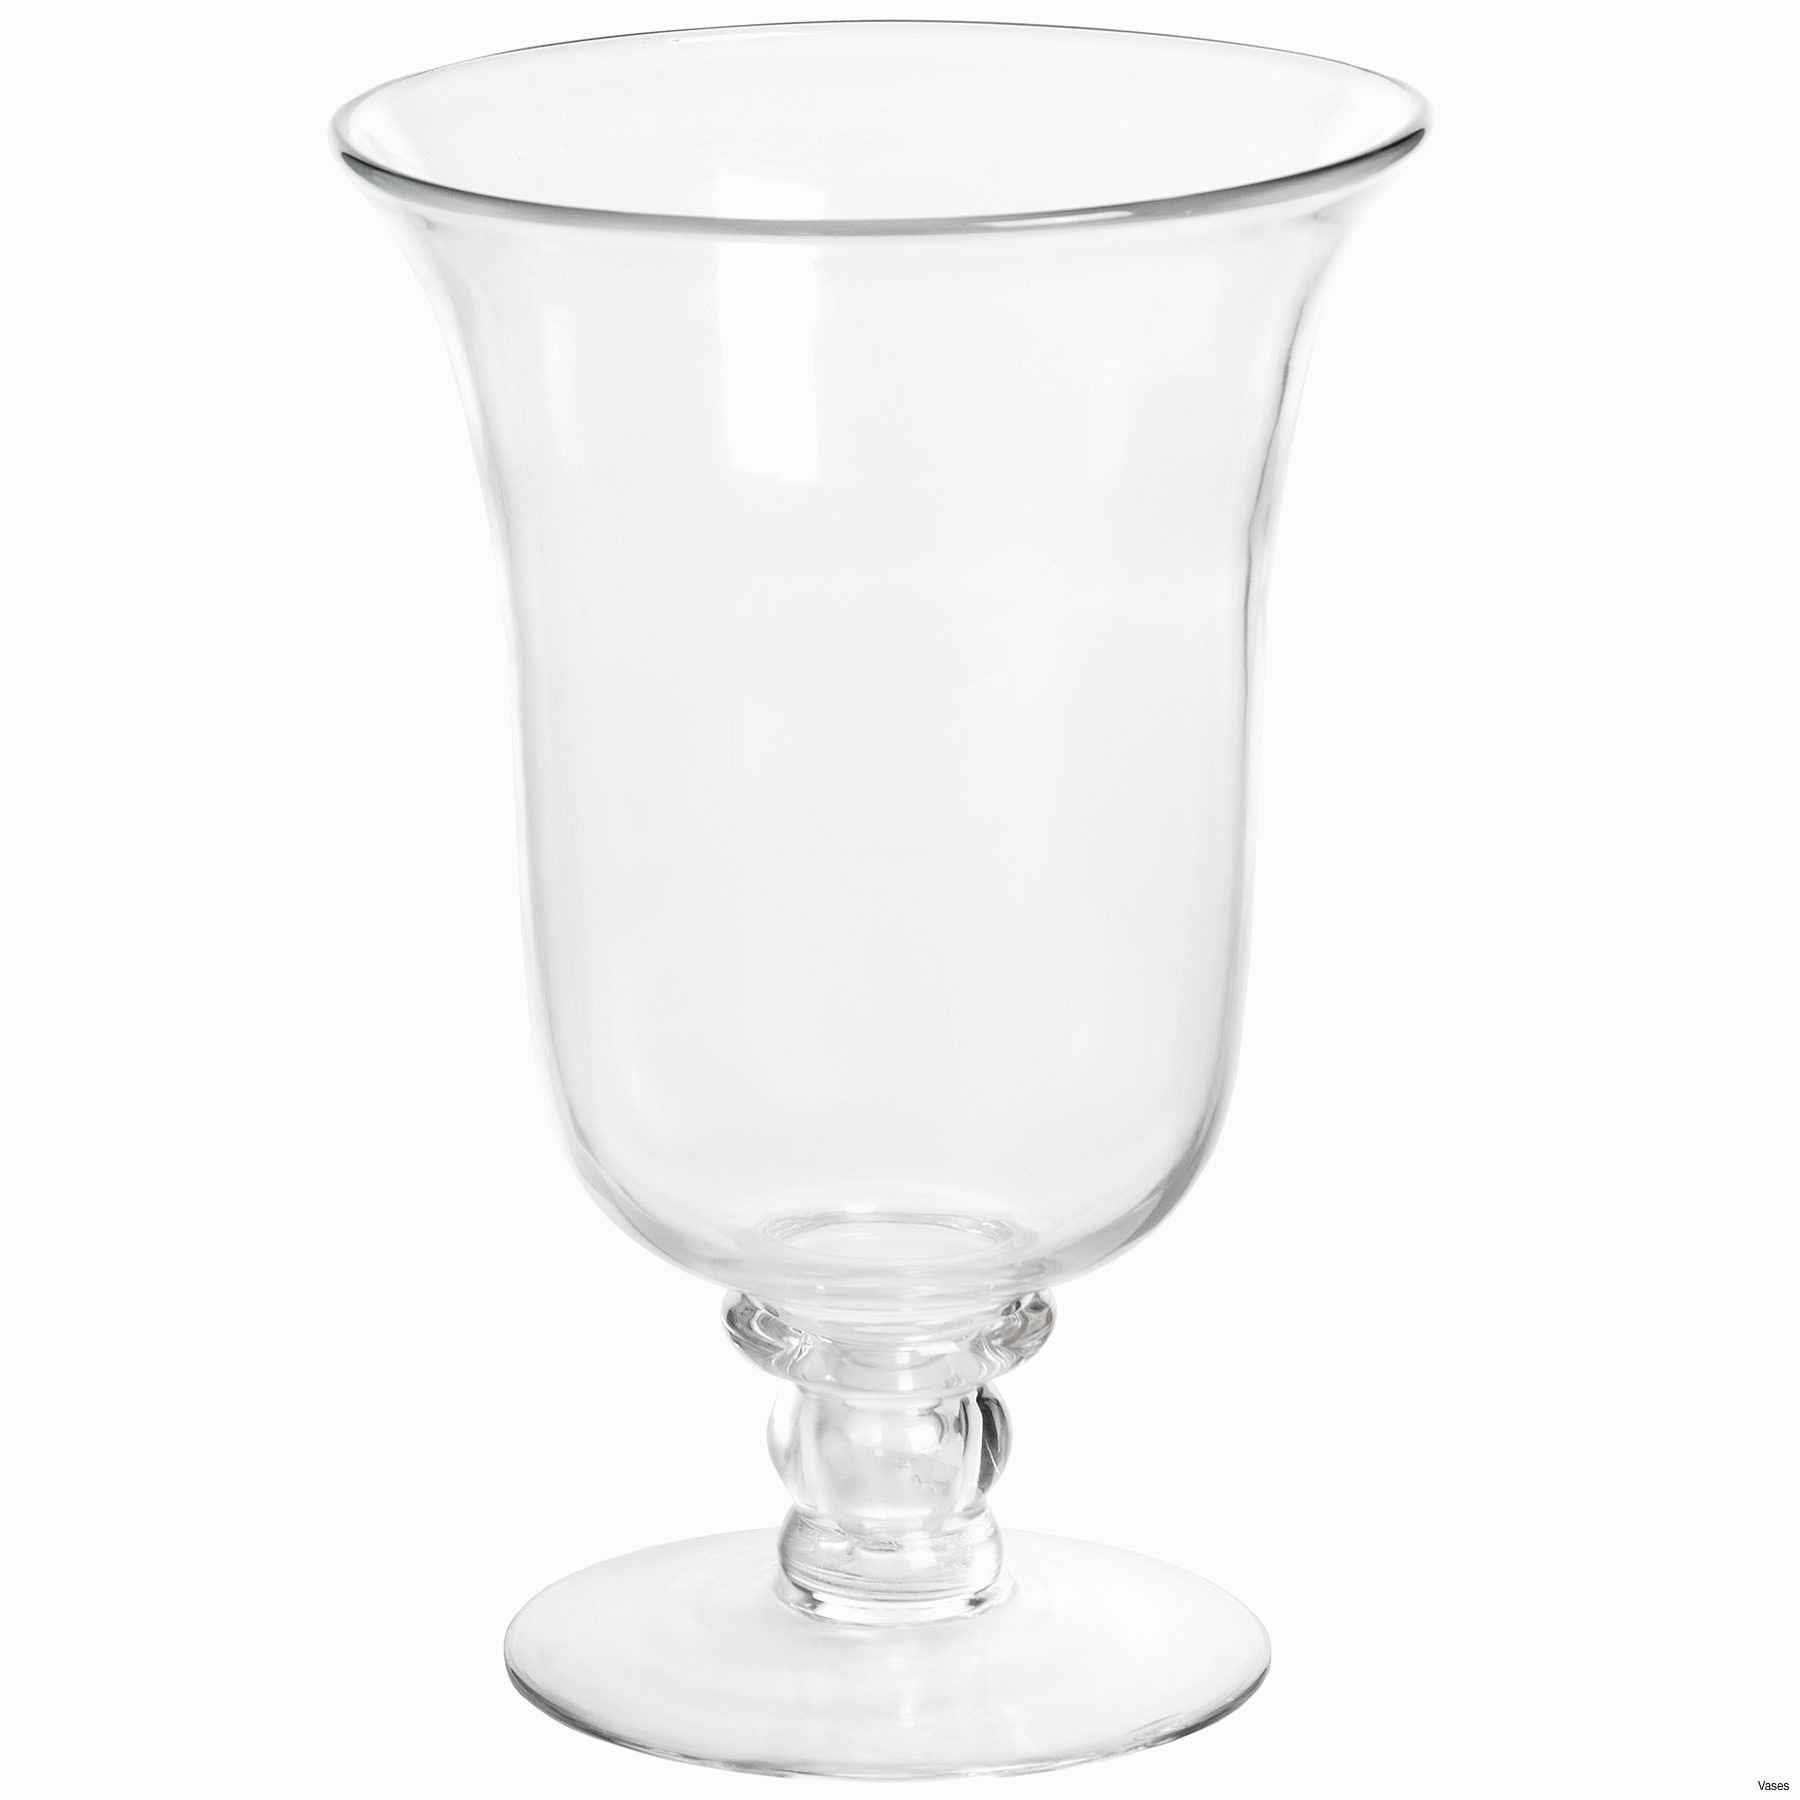 26 Perfect Flower Vase Stand 2024 free download flower vase stand of candle stands wholesale lovely faux crystal candle holders alive pertaining to candle stands wholesale lovely faux crystal candle holders alive vases gold tall jpgi 0d c